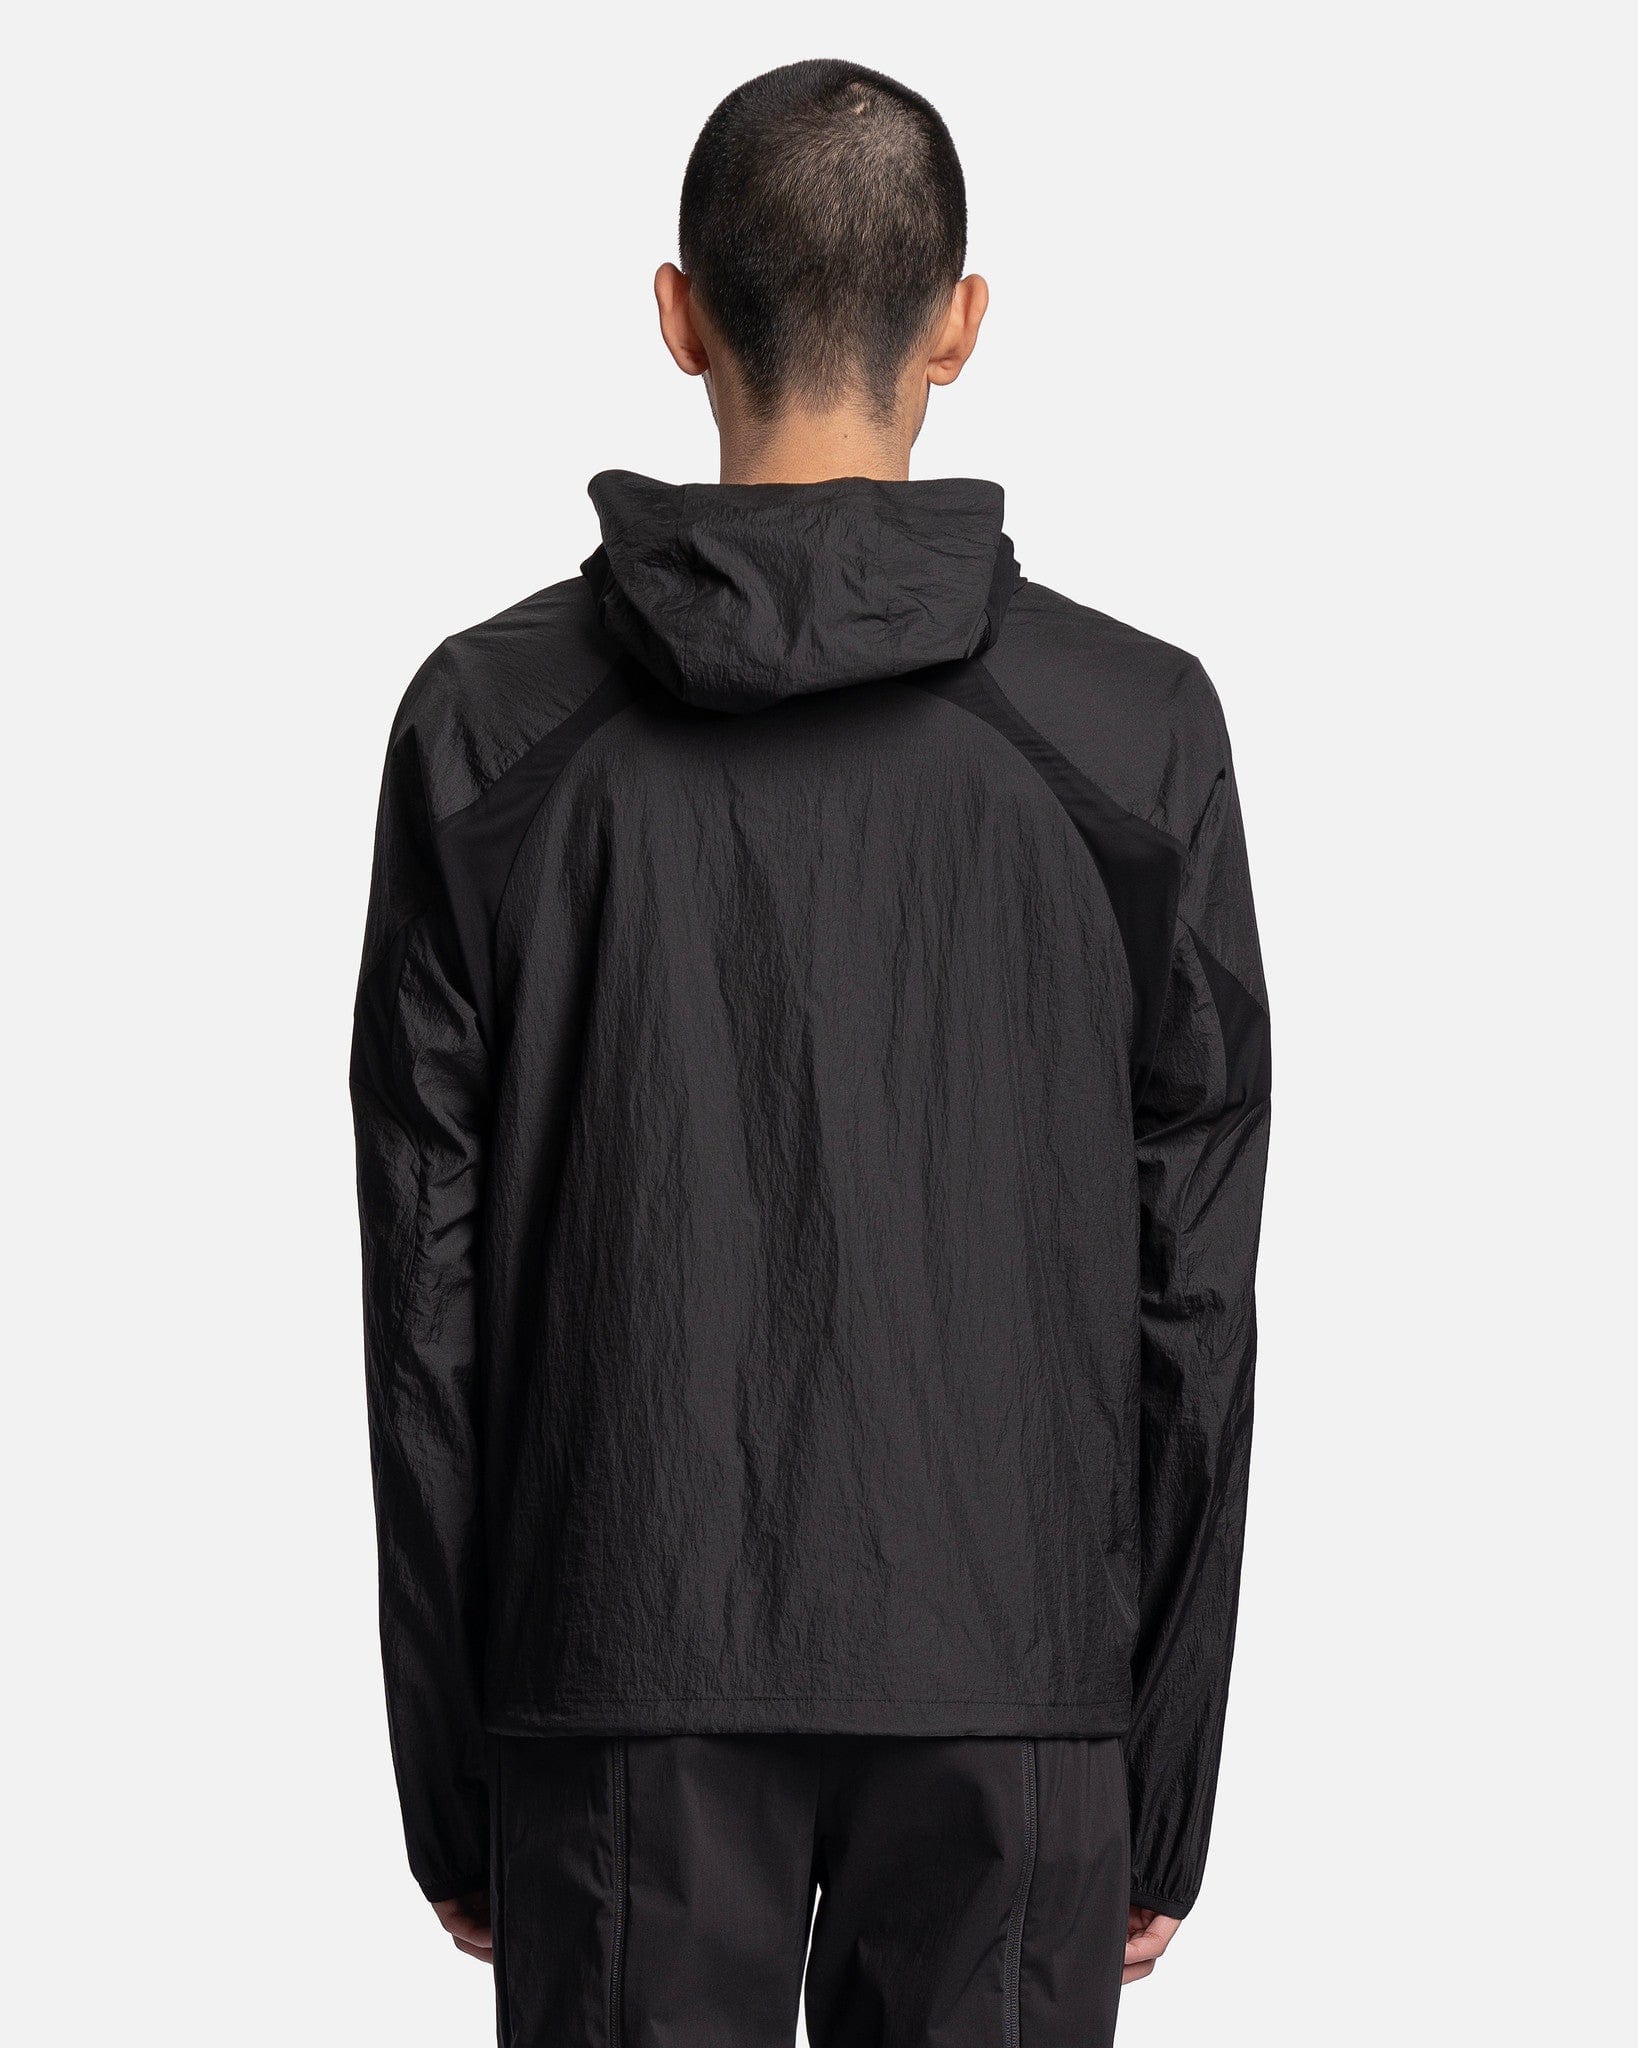 POST ARCHIVE FACTION (P.A.F) Men's Jackets 5.0+ Technical Jacket Right in Nylon/Black